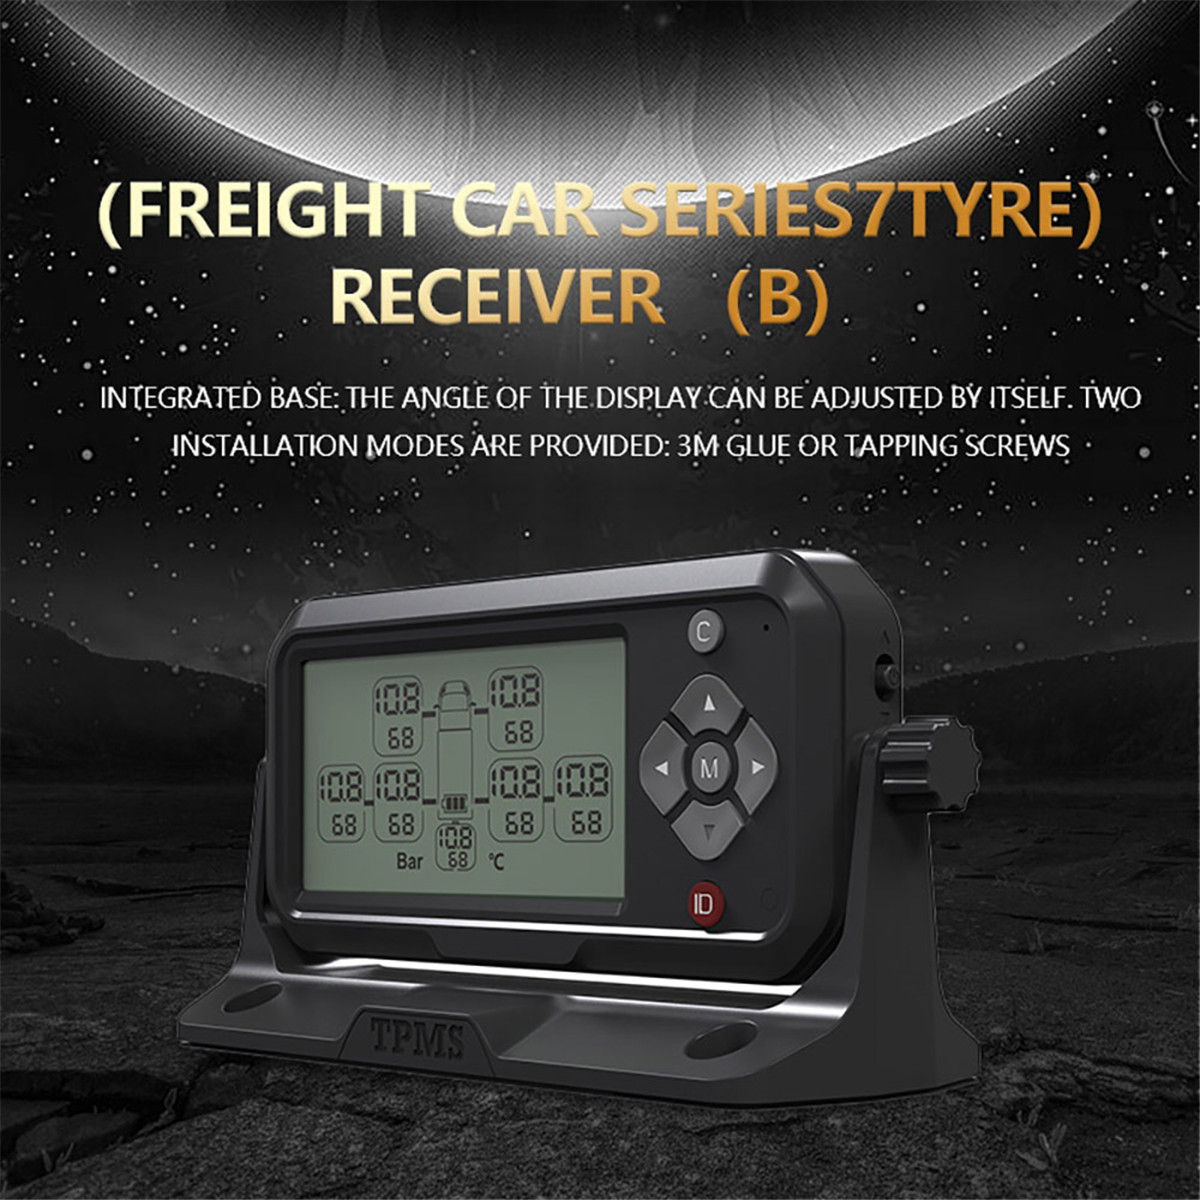 (Freight car series7tyre) Receiver (8)